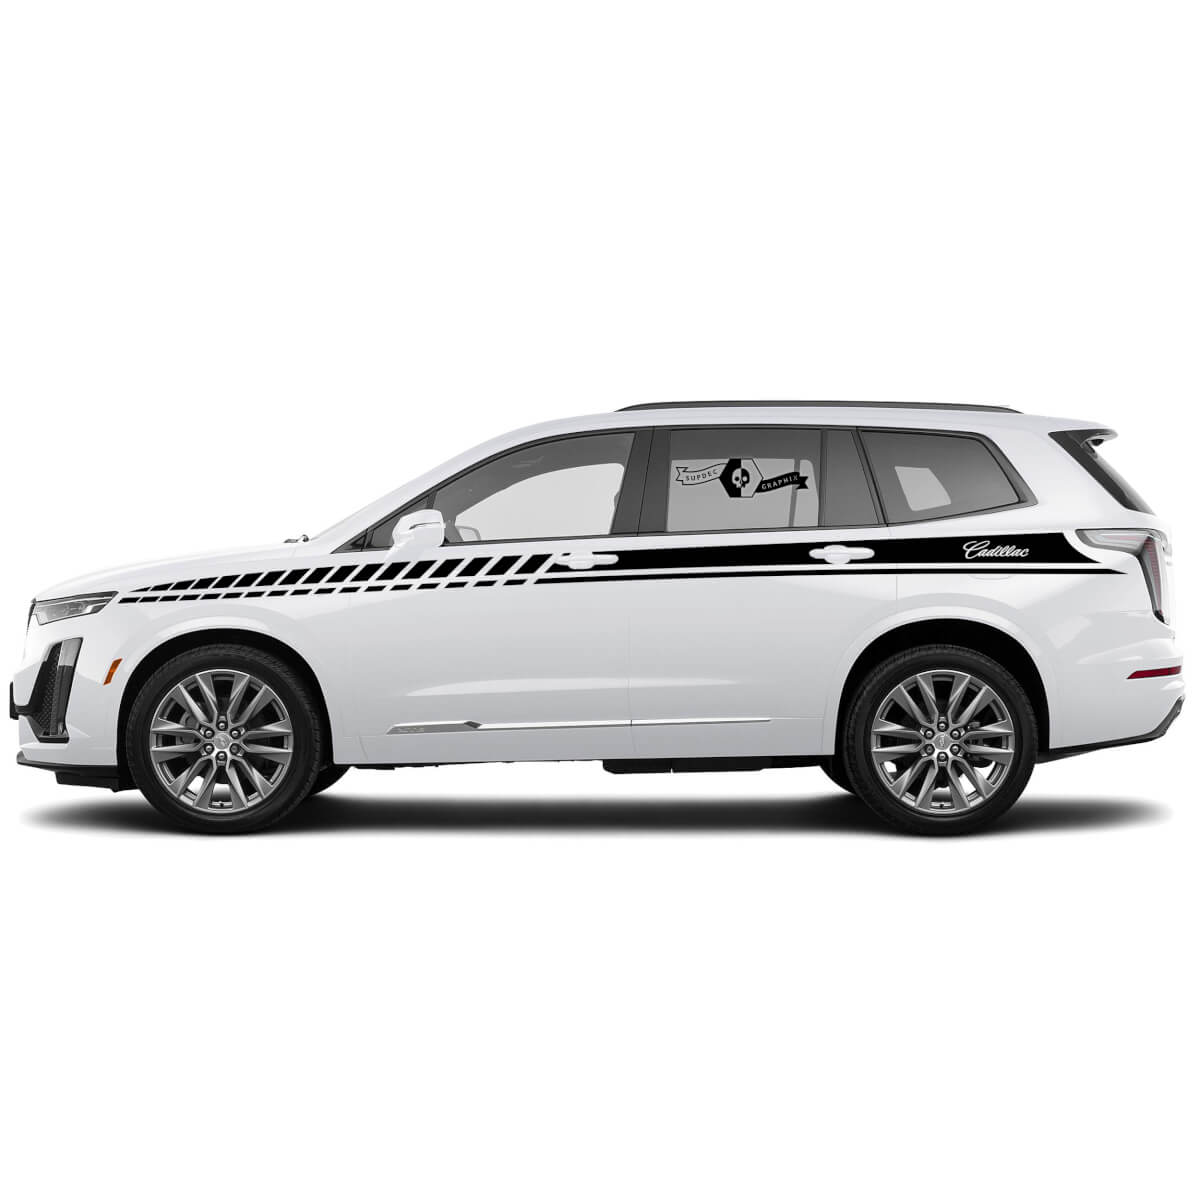 2 New Decal Sticker Doors Up Accent  Lines Wrap vinyl Decal for Cadillac XT6
